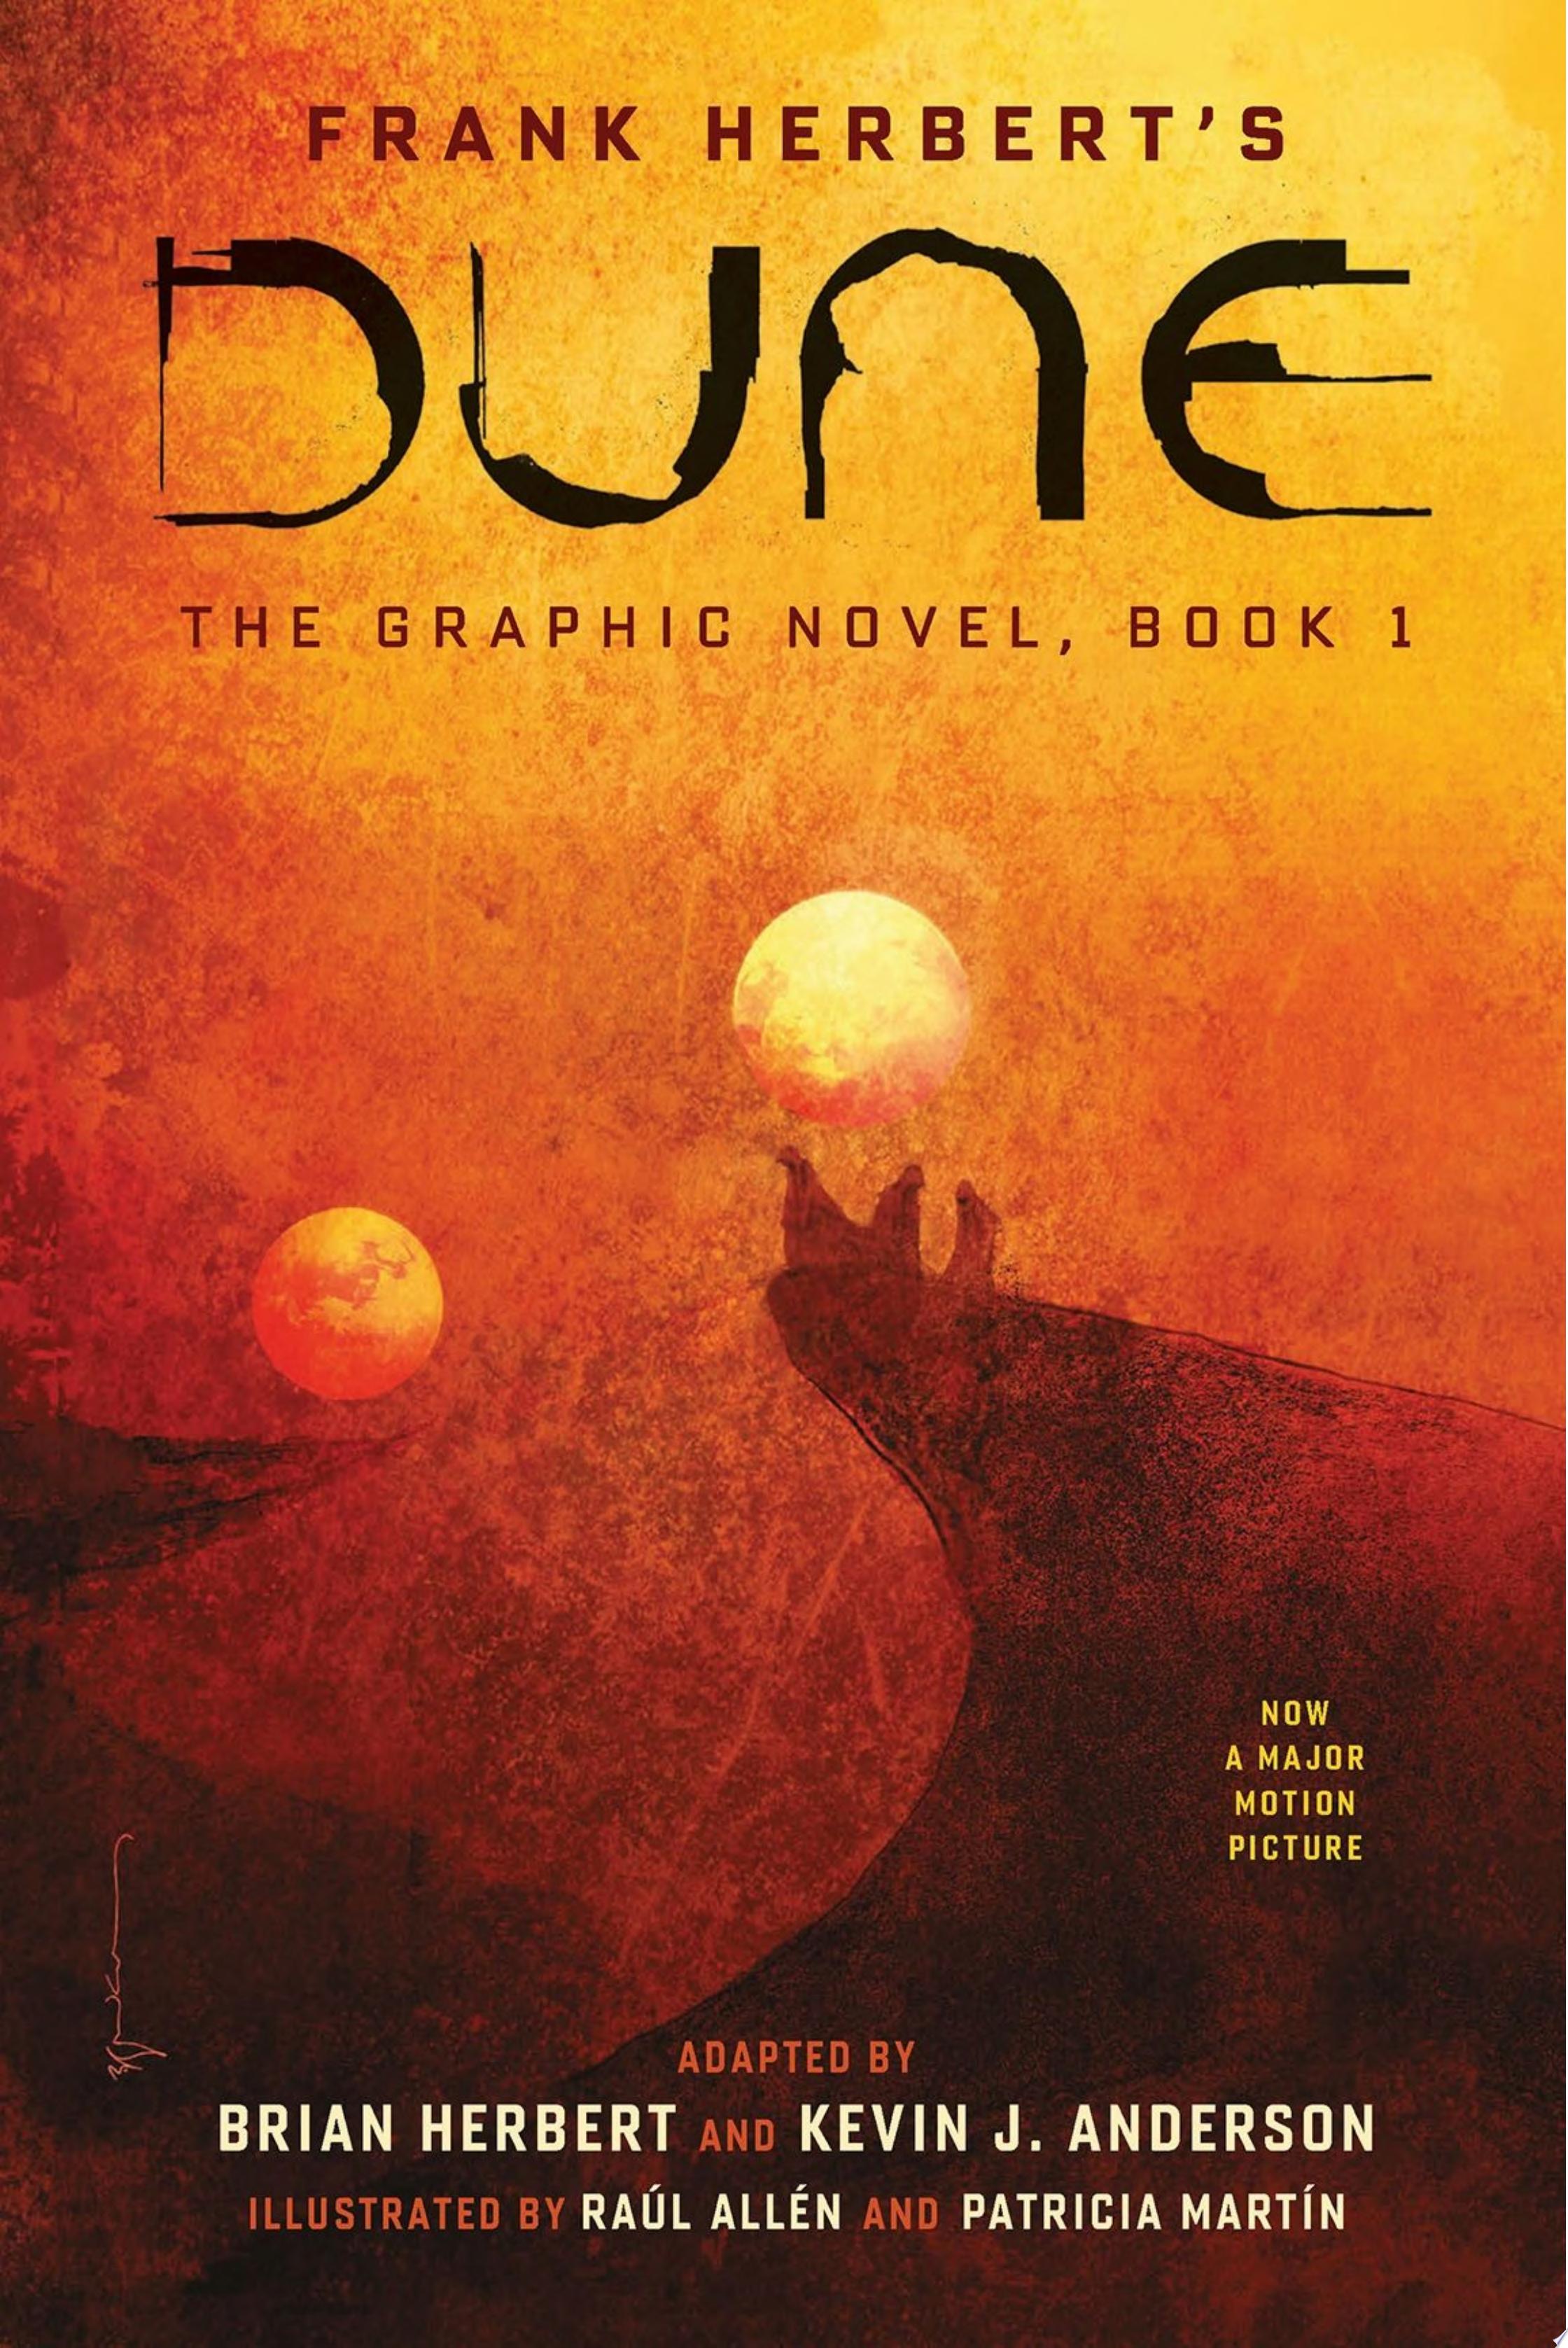 Image for "DUNE: The Graphic Novel, Book 1: Dune"